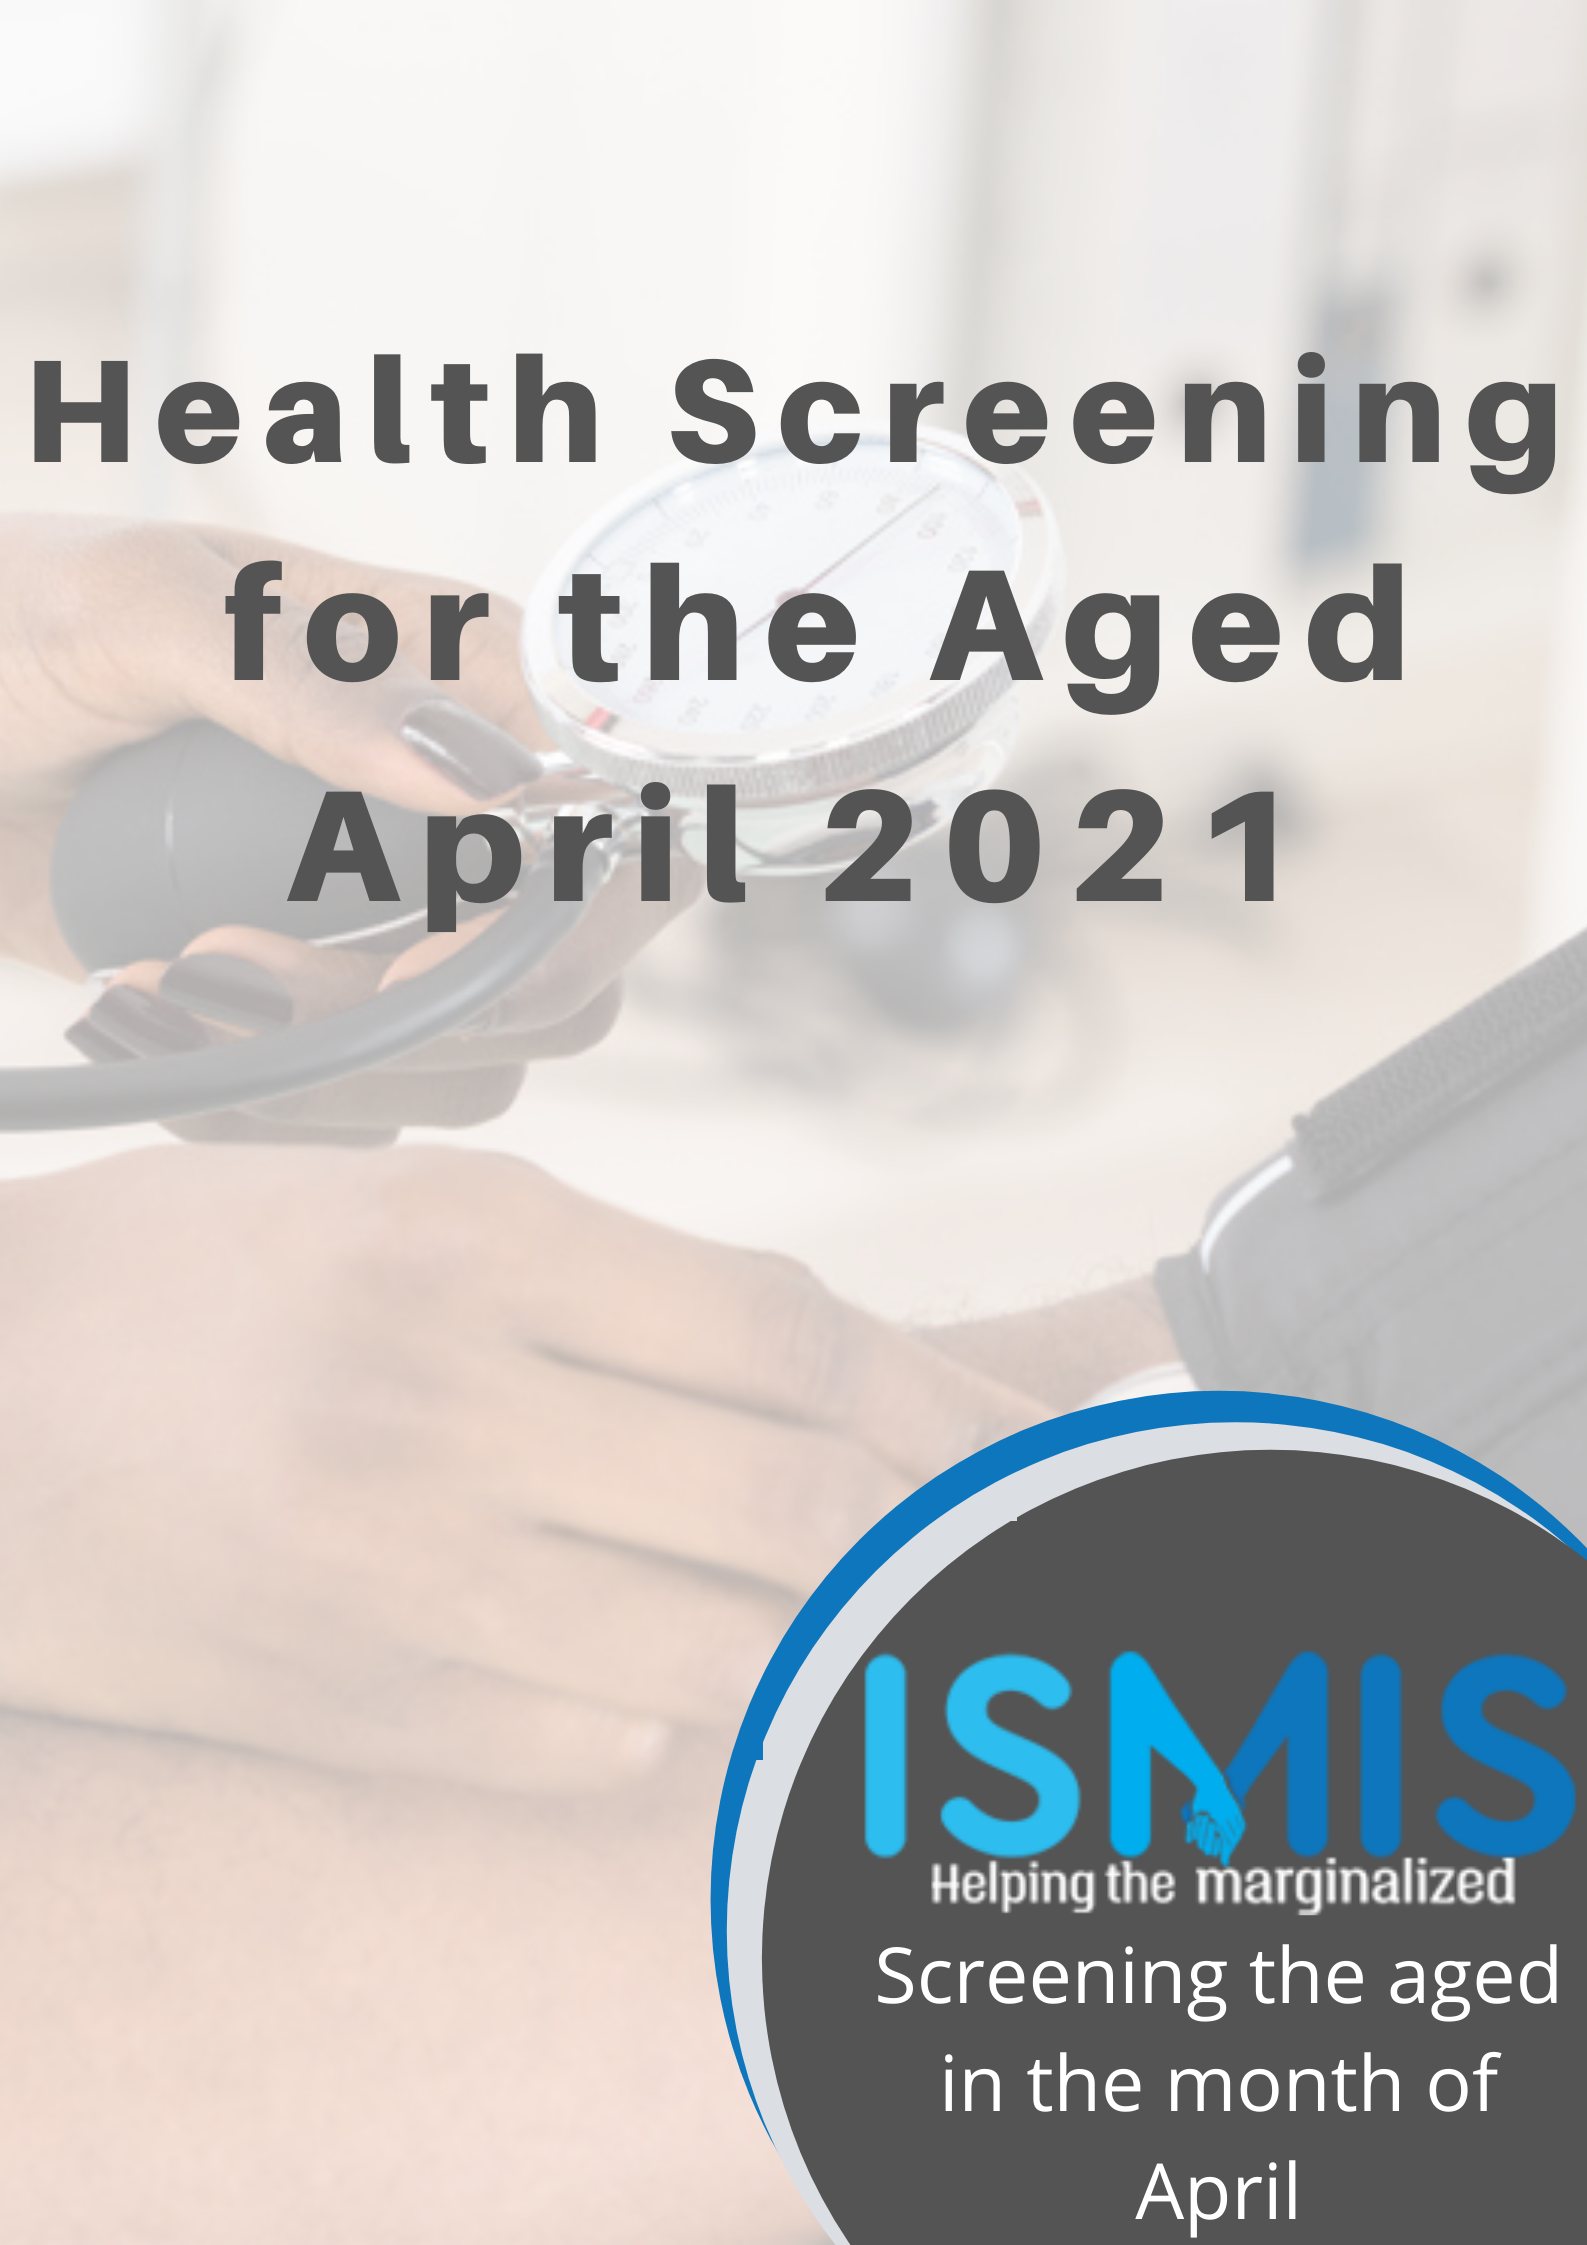 Health Screening for the Aged